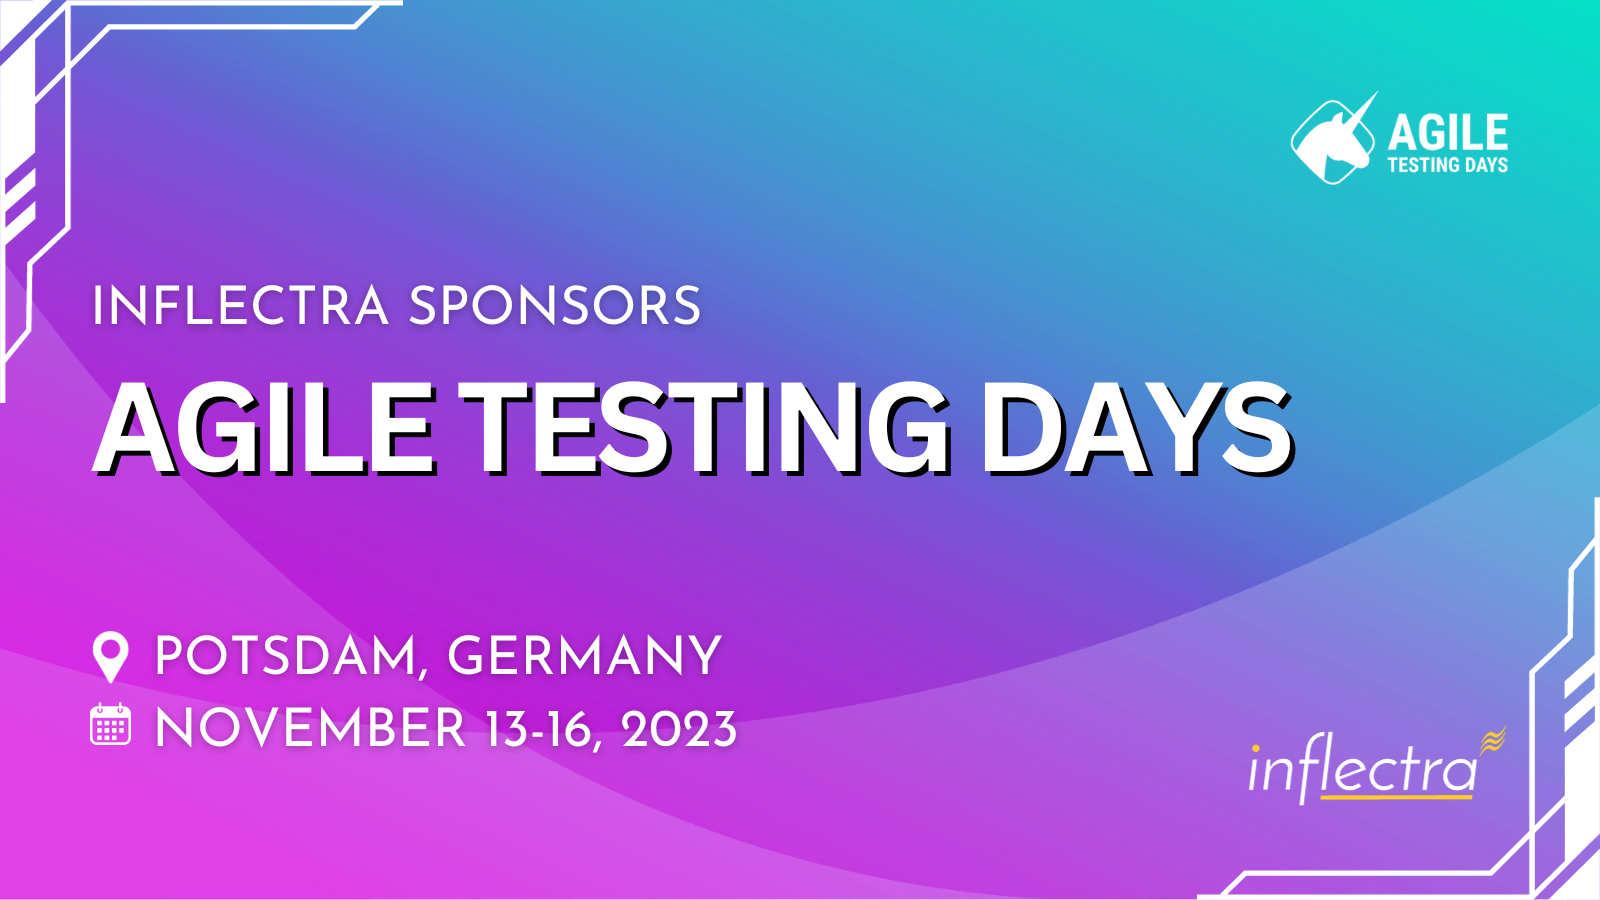 inflectra-sponsors-agile-testing-days-in-potsdam-germany-image